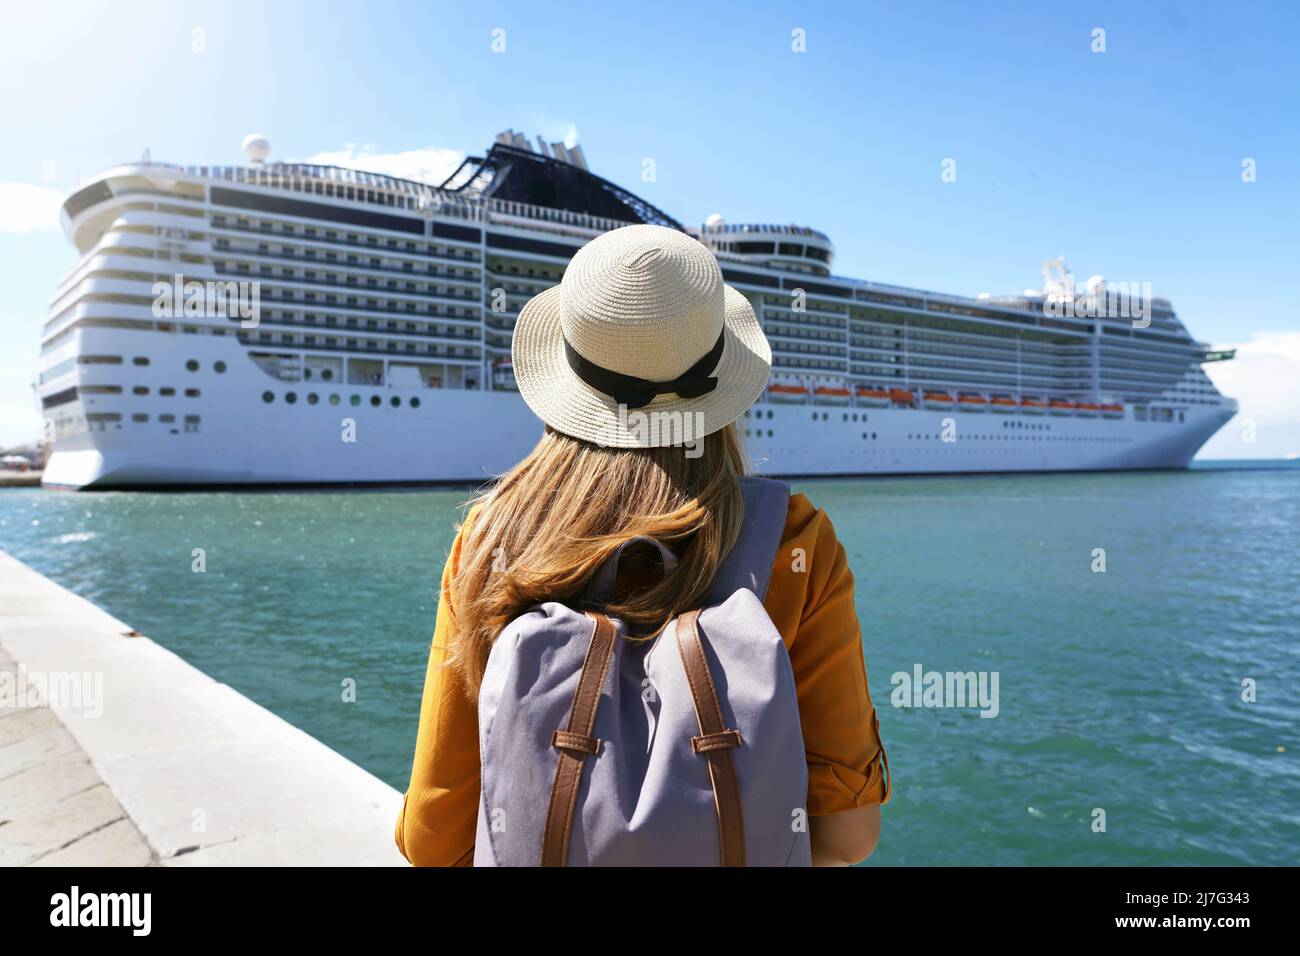 Cruise vacation. Rear view of tourist girl with backpack and hat standing in front of big cruise ship. Stock Photo